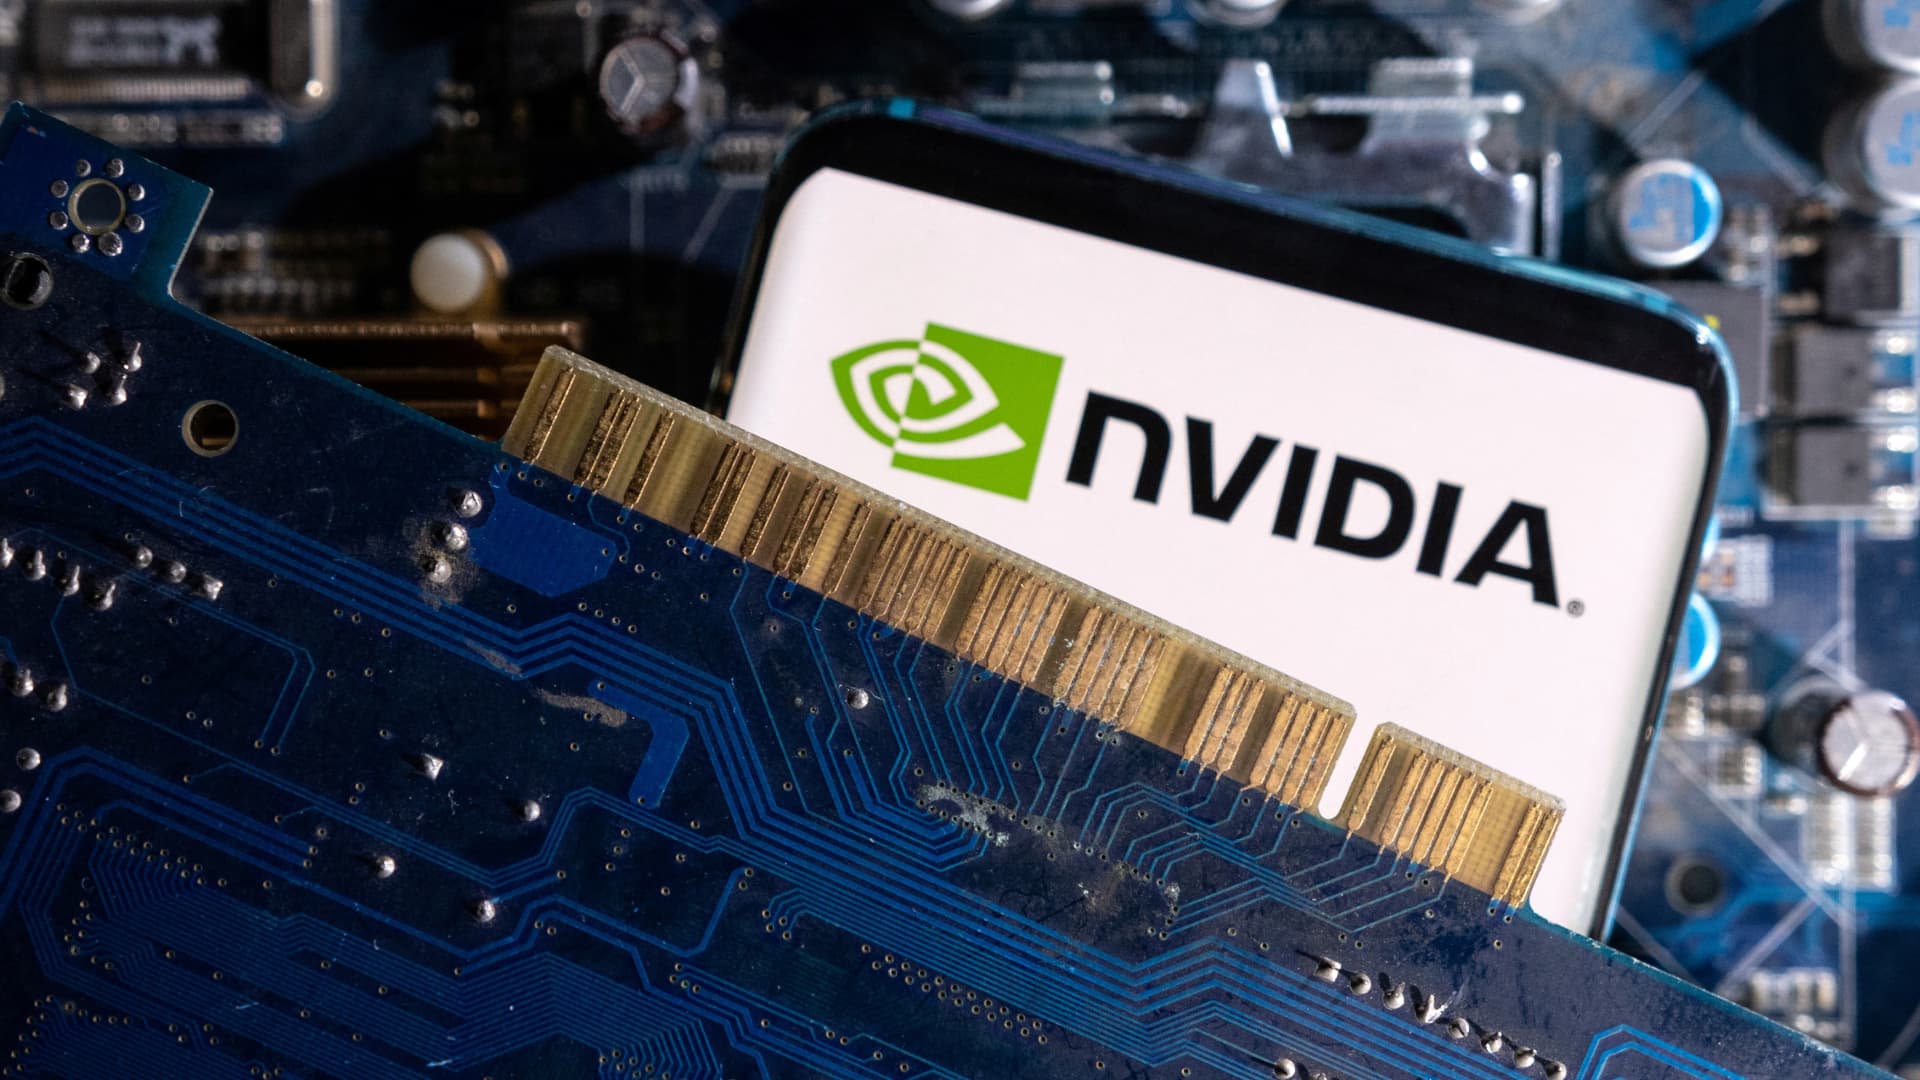 Friday’s trading could trigger a  billion rush of demand for Nvidia shares. Here’s how